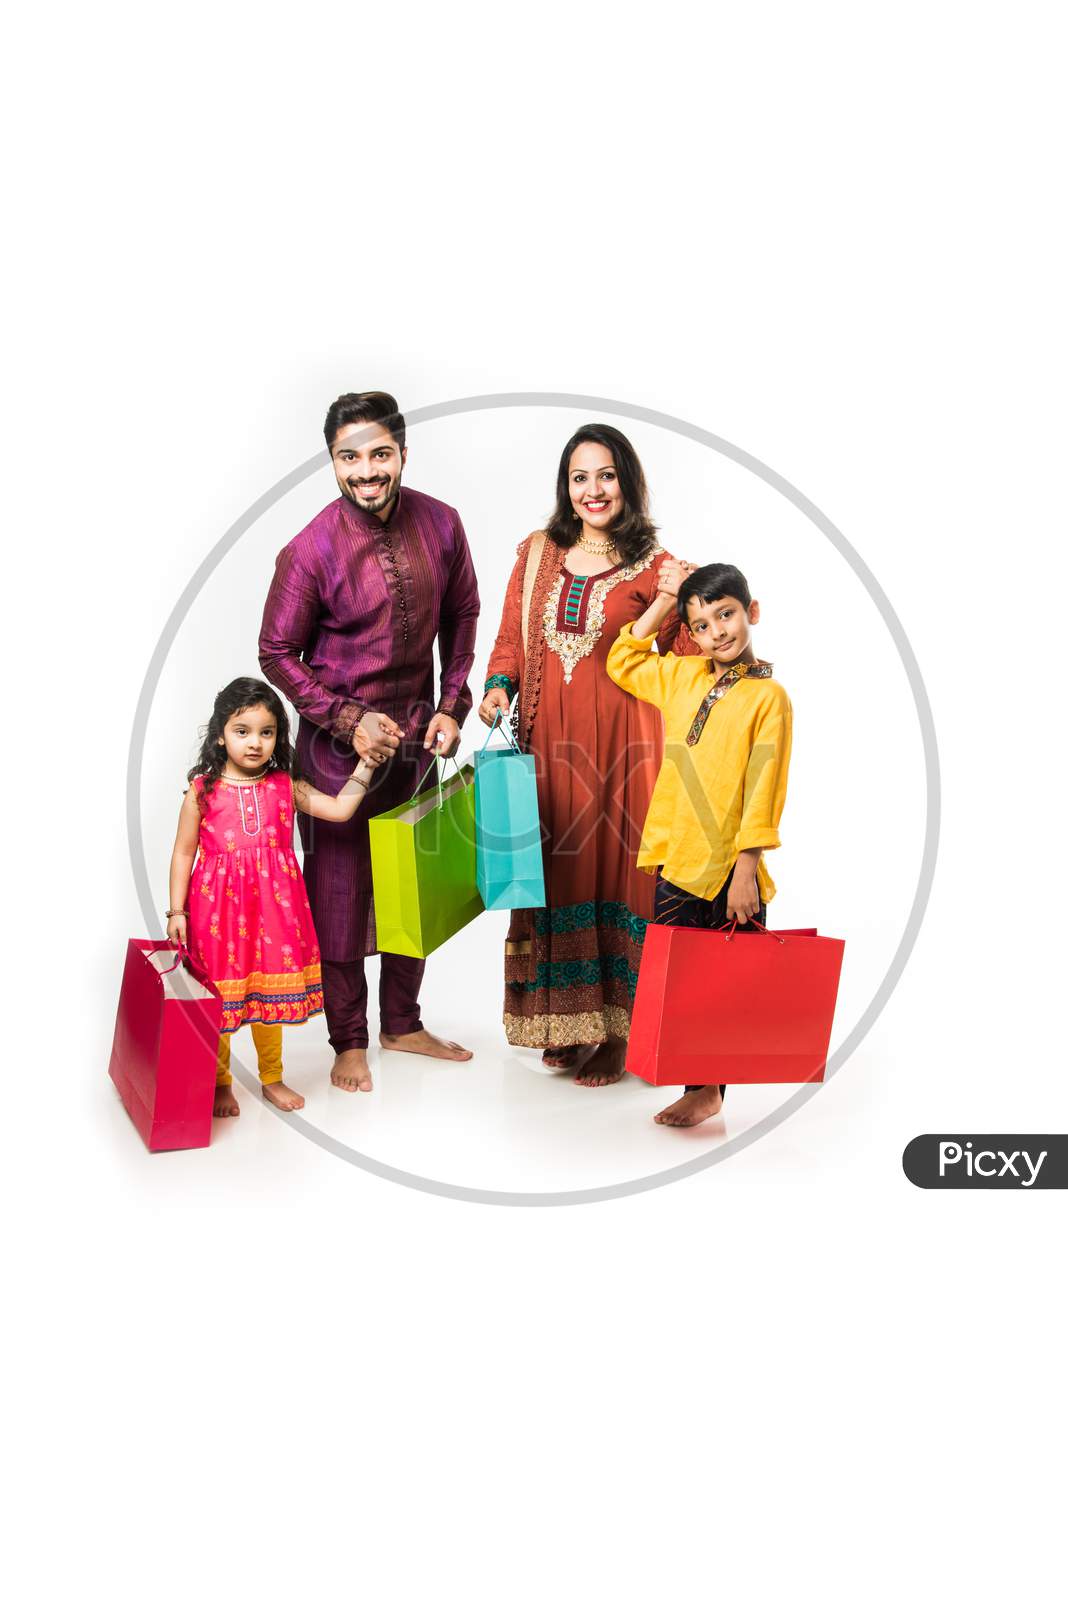 Indian family celebrating Diwali / Deepavali in traditional wear with shopping bags, standing isolated over white background